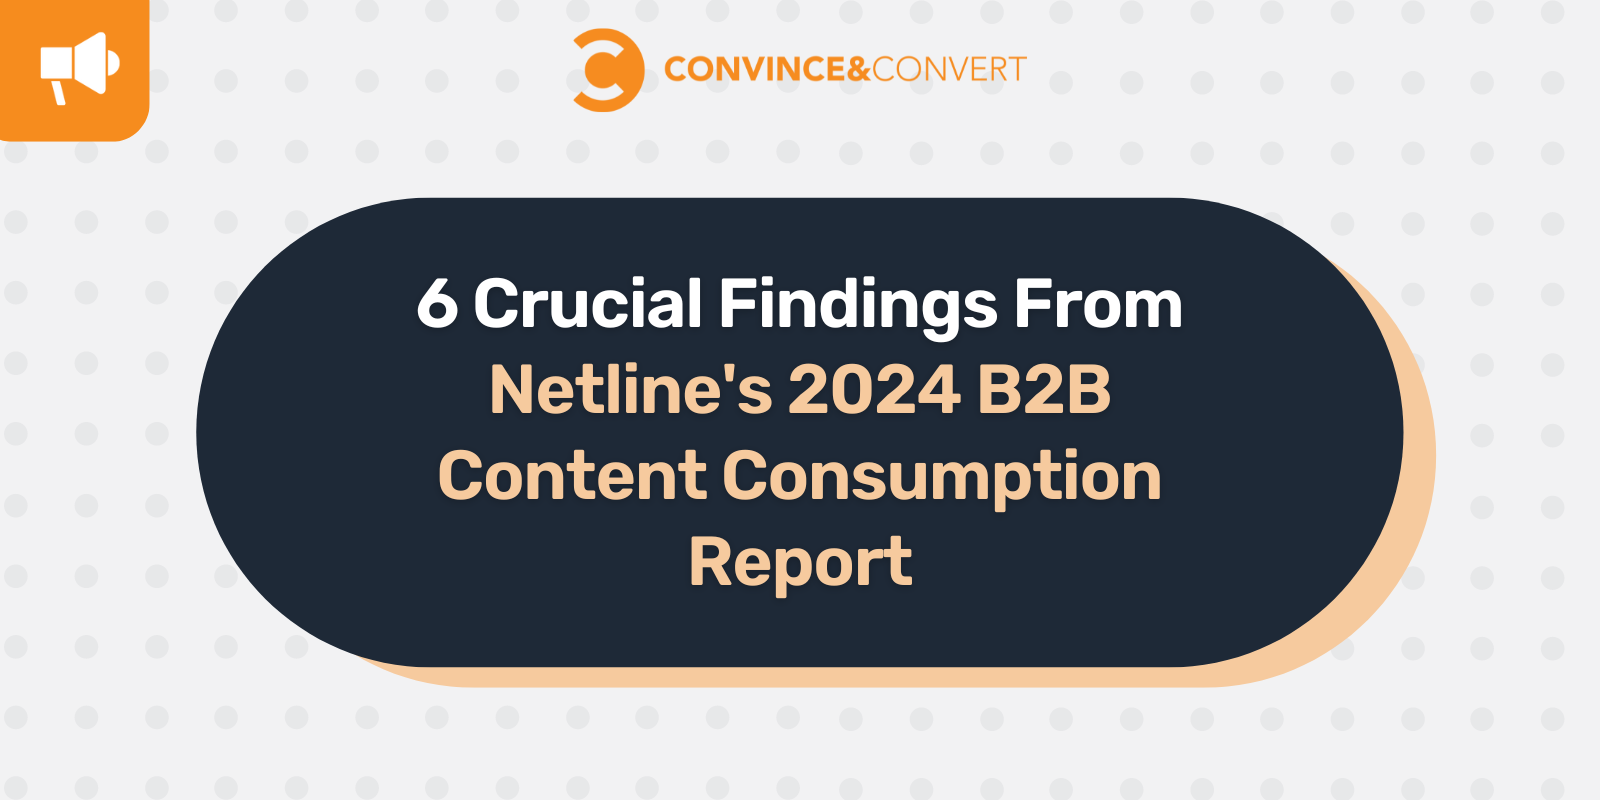 6 Crucial Findings From Netlines 2024 B2B Content Consumption Report